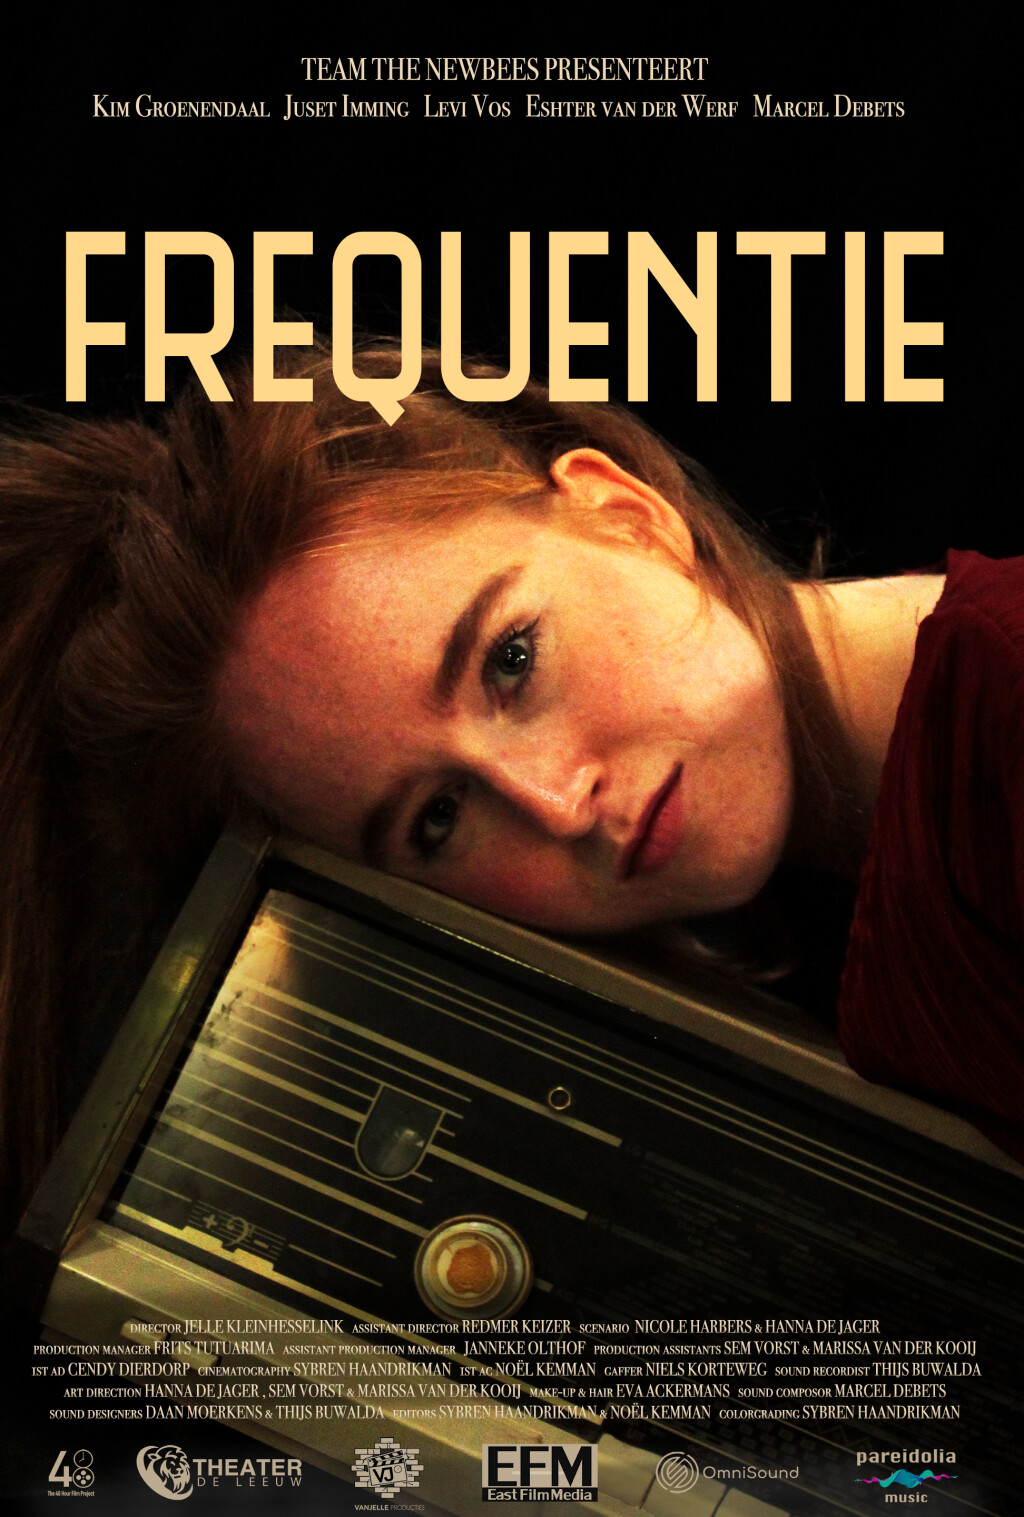 Filmposter for Frequentie